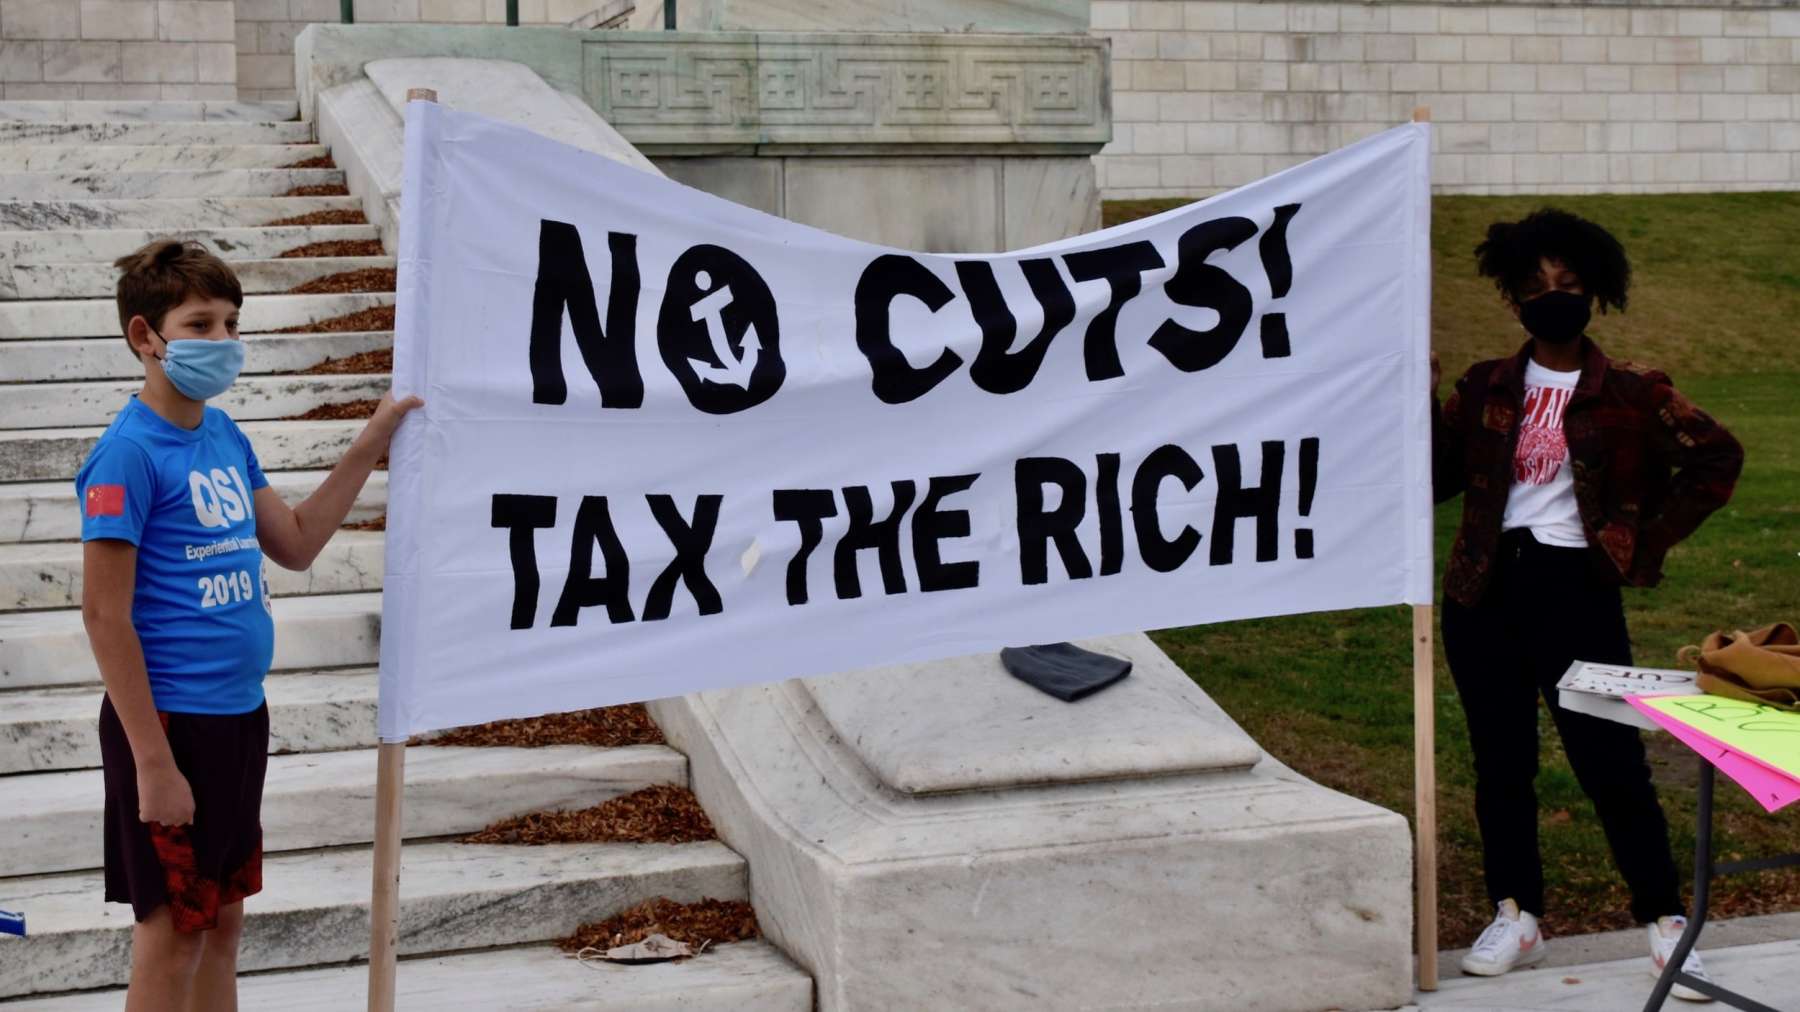 Coalition rallies for taxes on rich to fund essential services